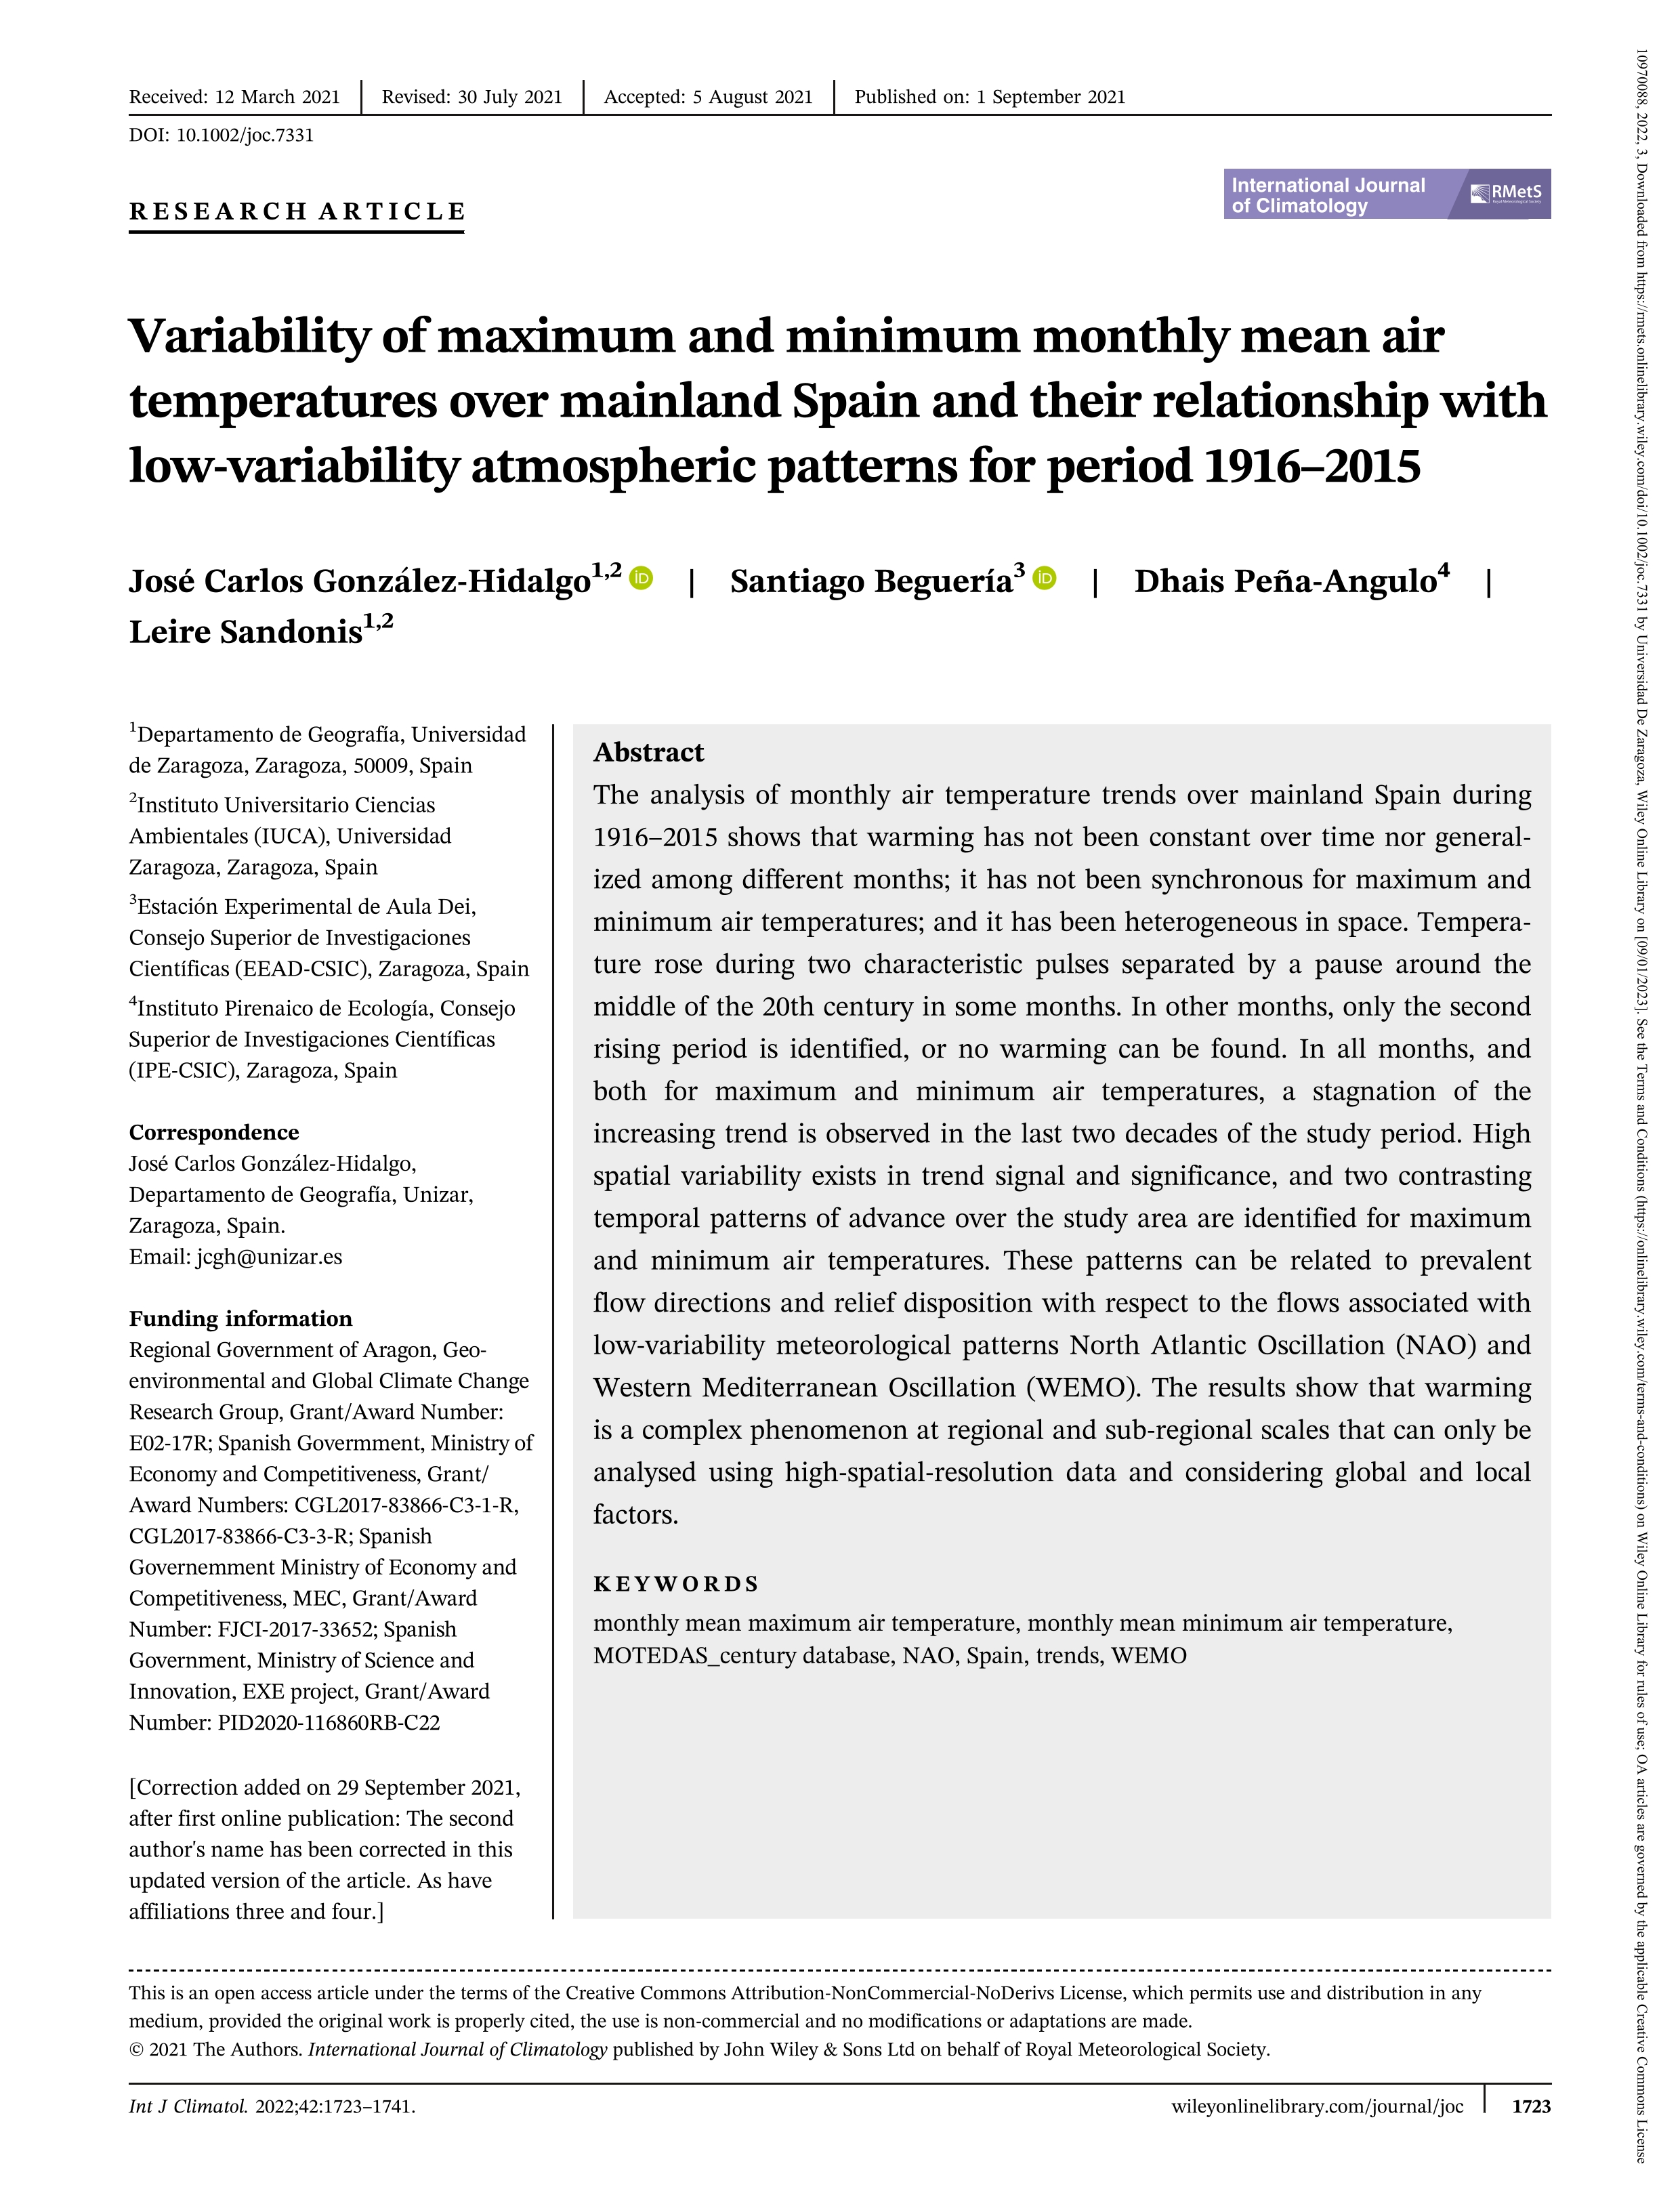 Variability of maximum and minimum monthly mean air temperatures over mainland Spain and their relationship with low-variability atmospheric patterns for period 1916–2015